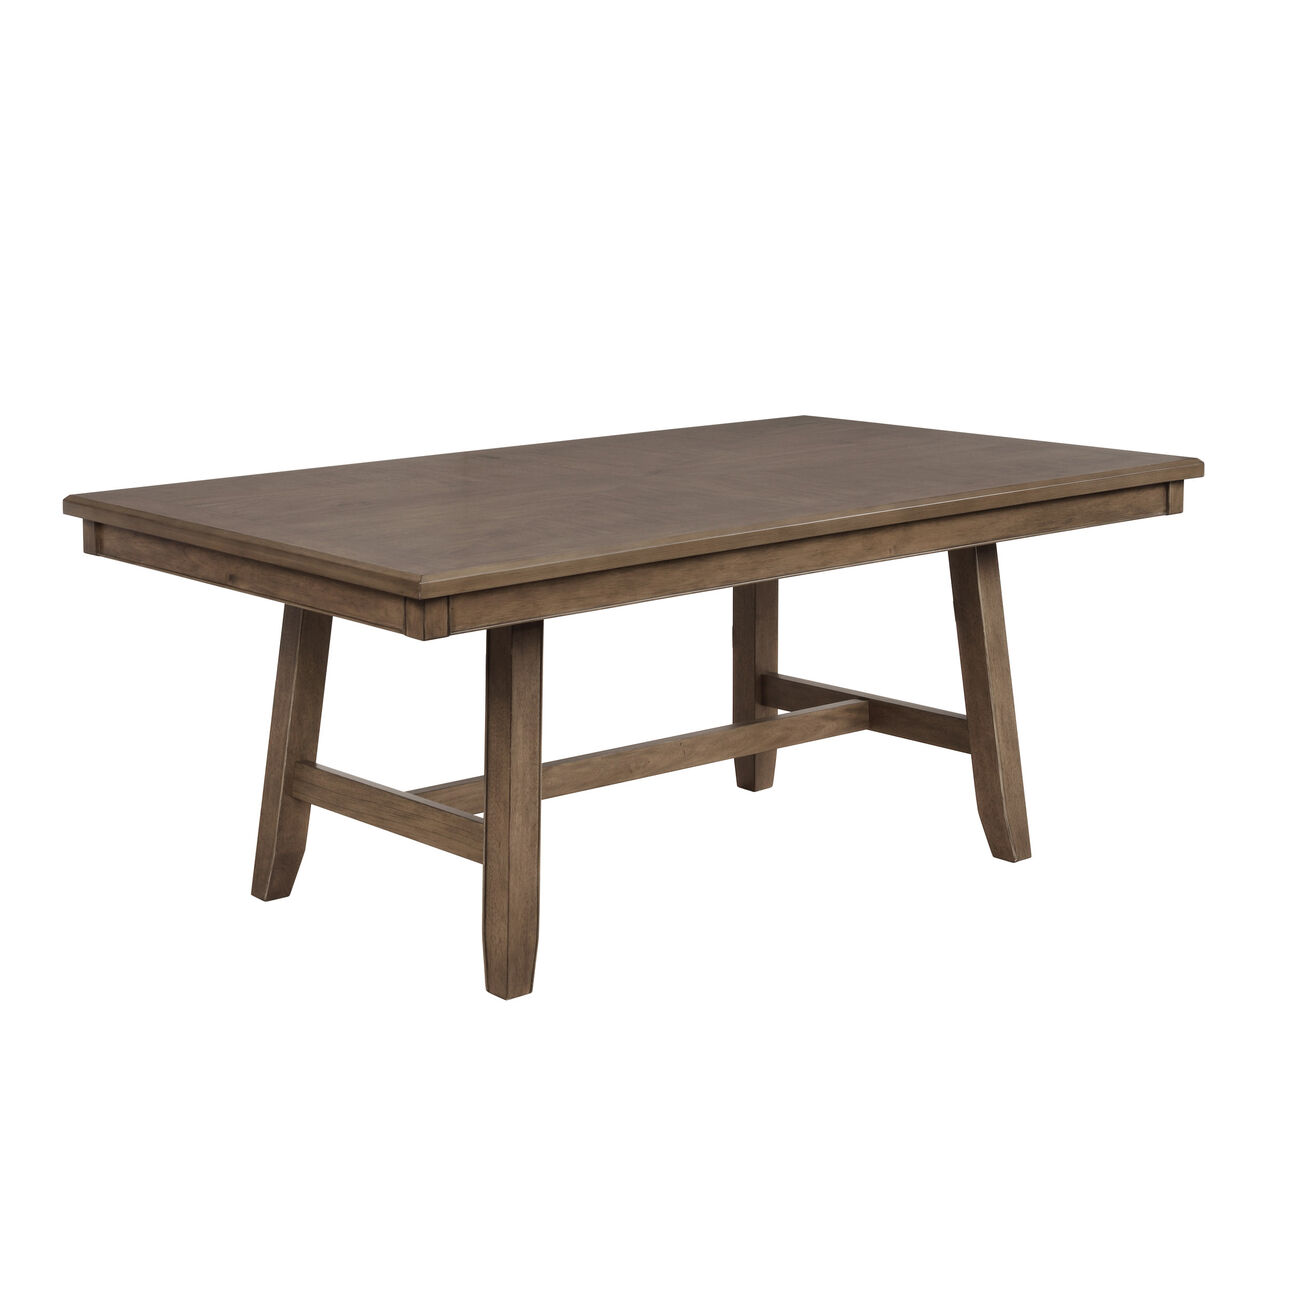 Rectangular Wooden Dining Table with Block Leg Support, Brown